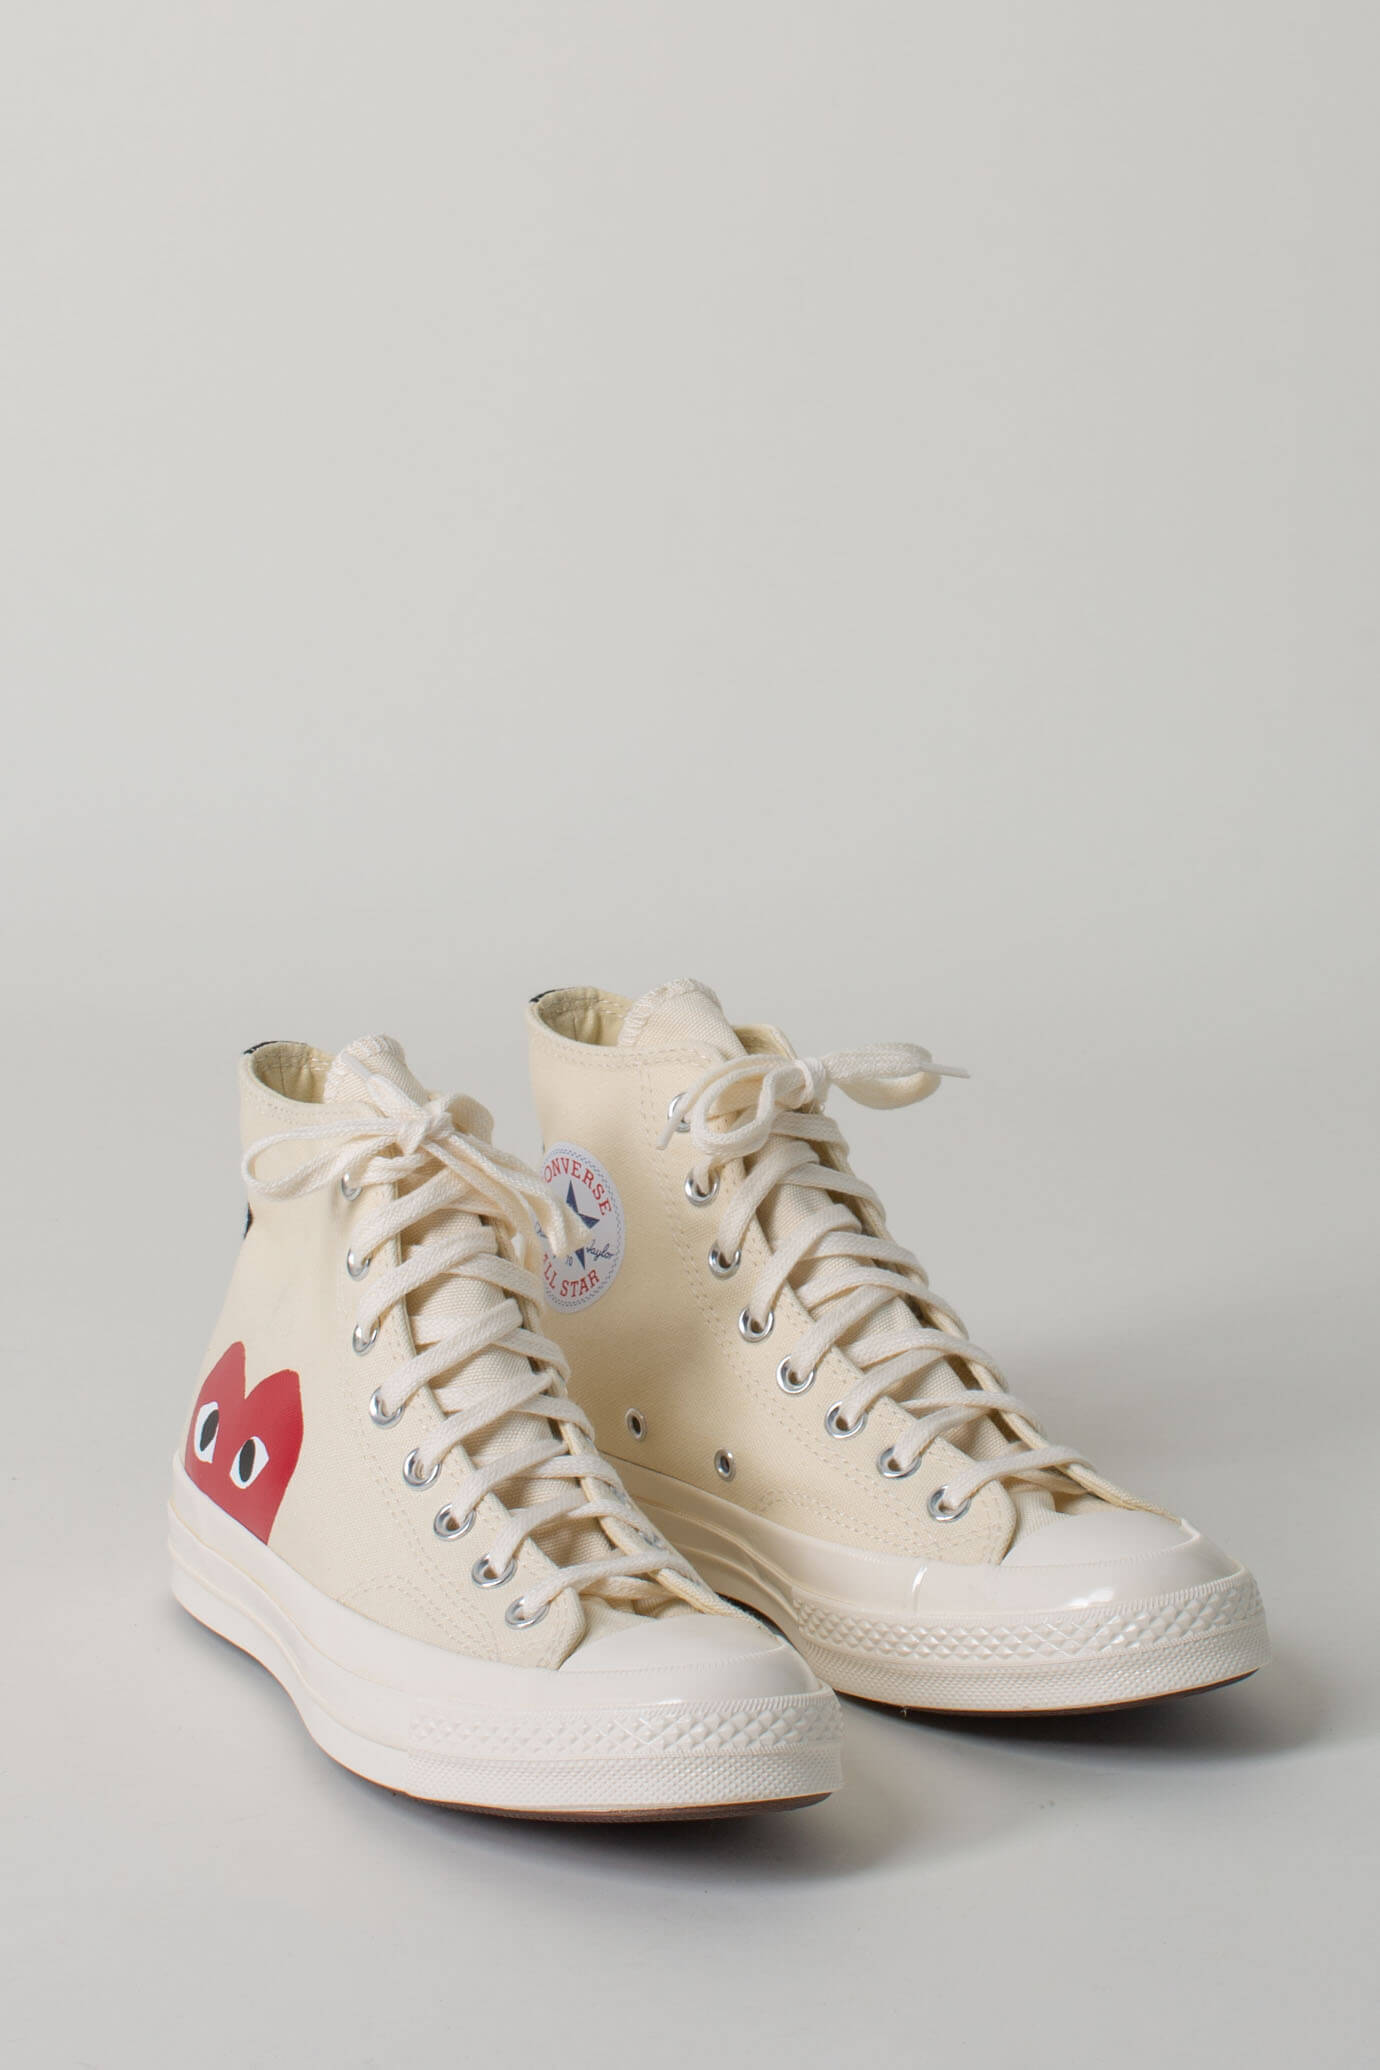 Converse Play High – LABELS